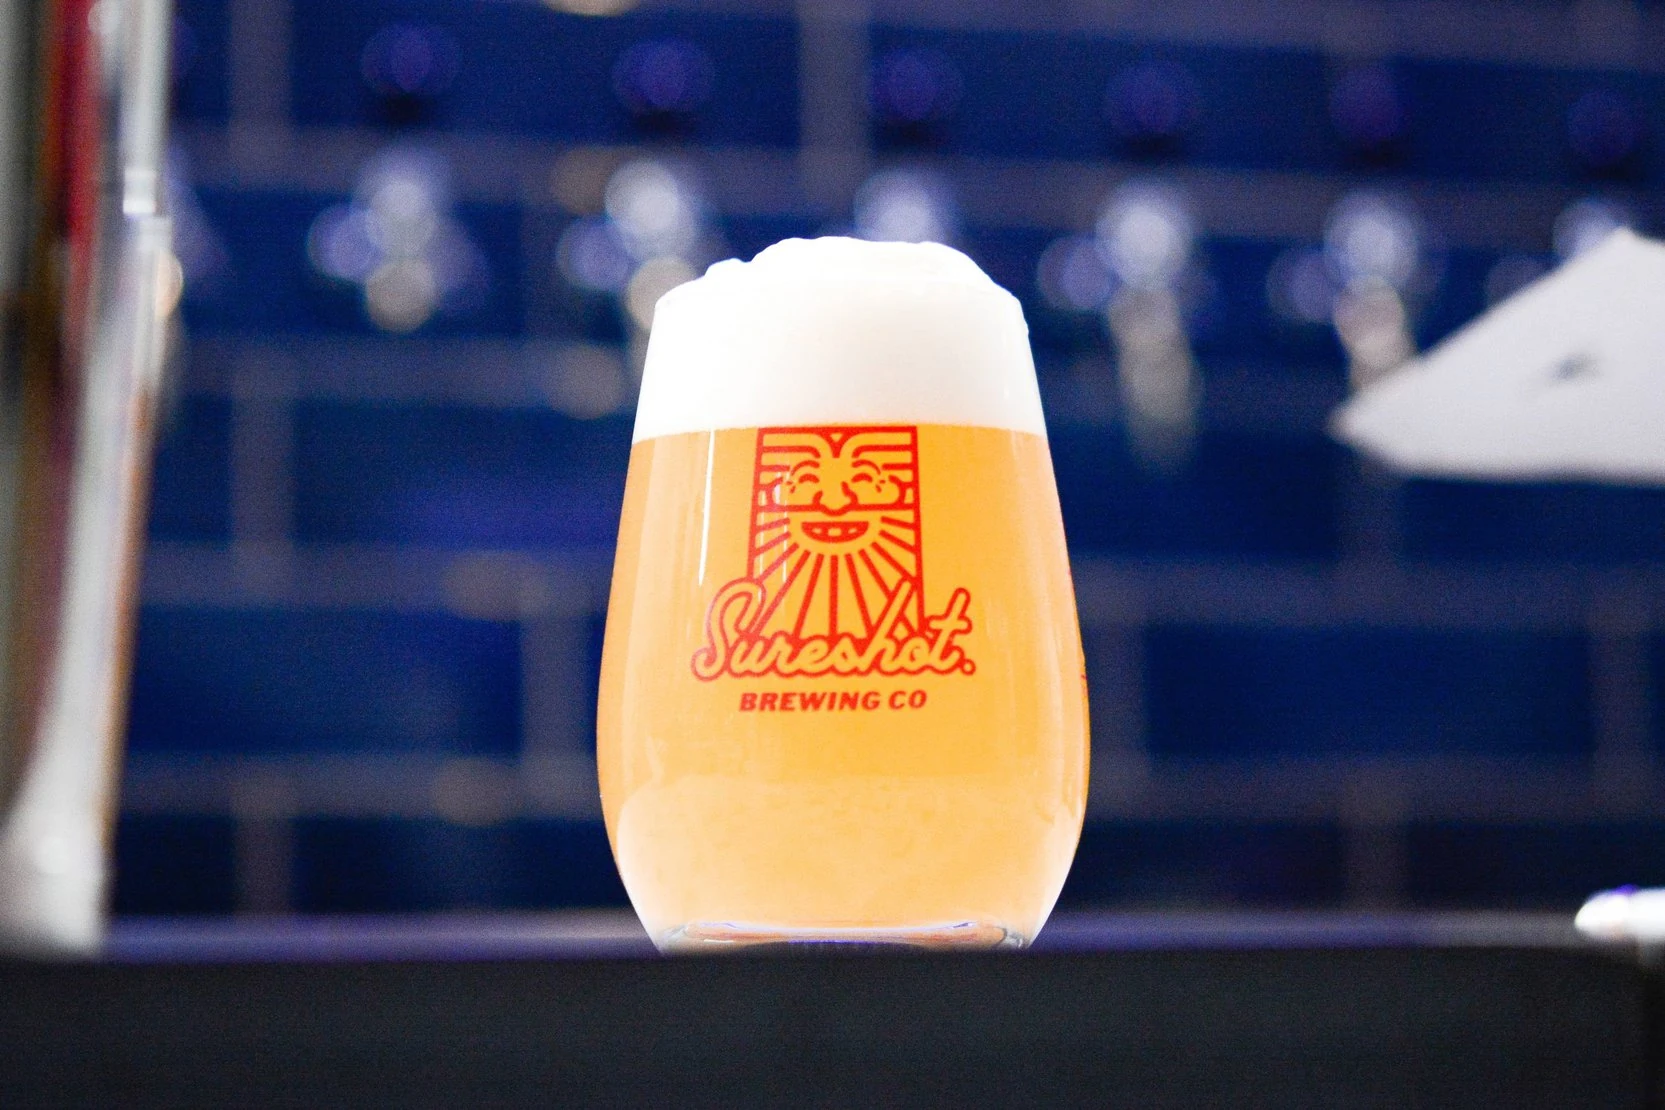 Sureshot Brewing's taproom glass